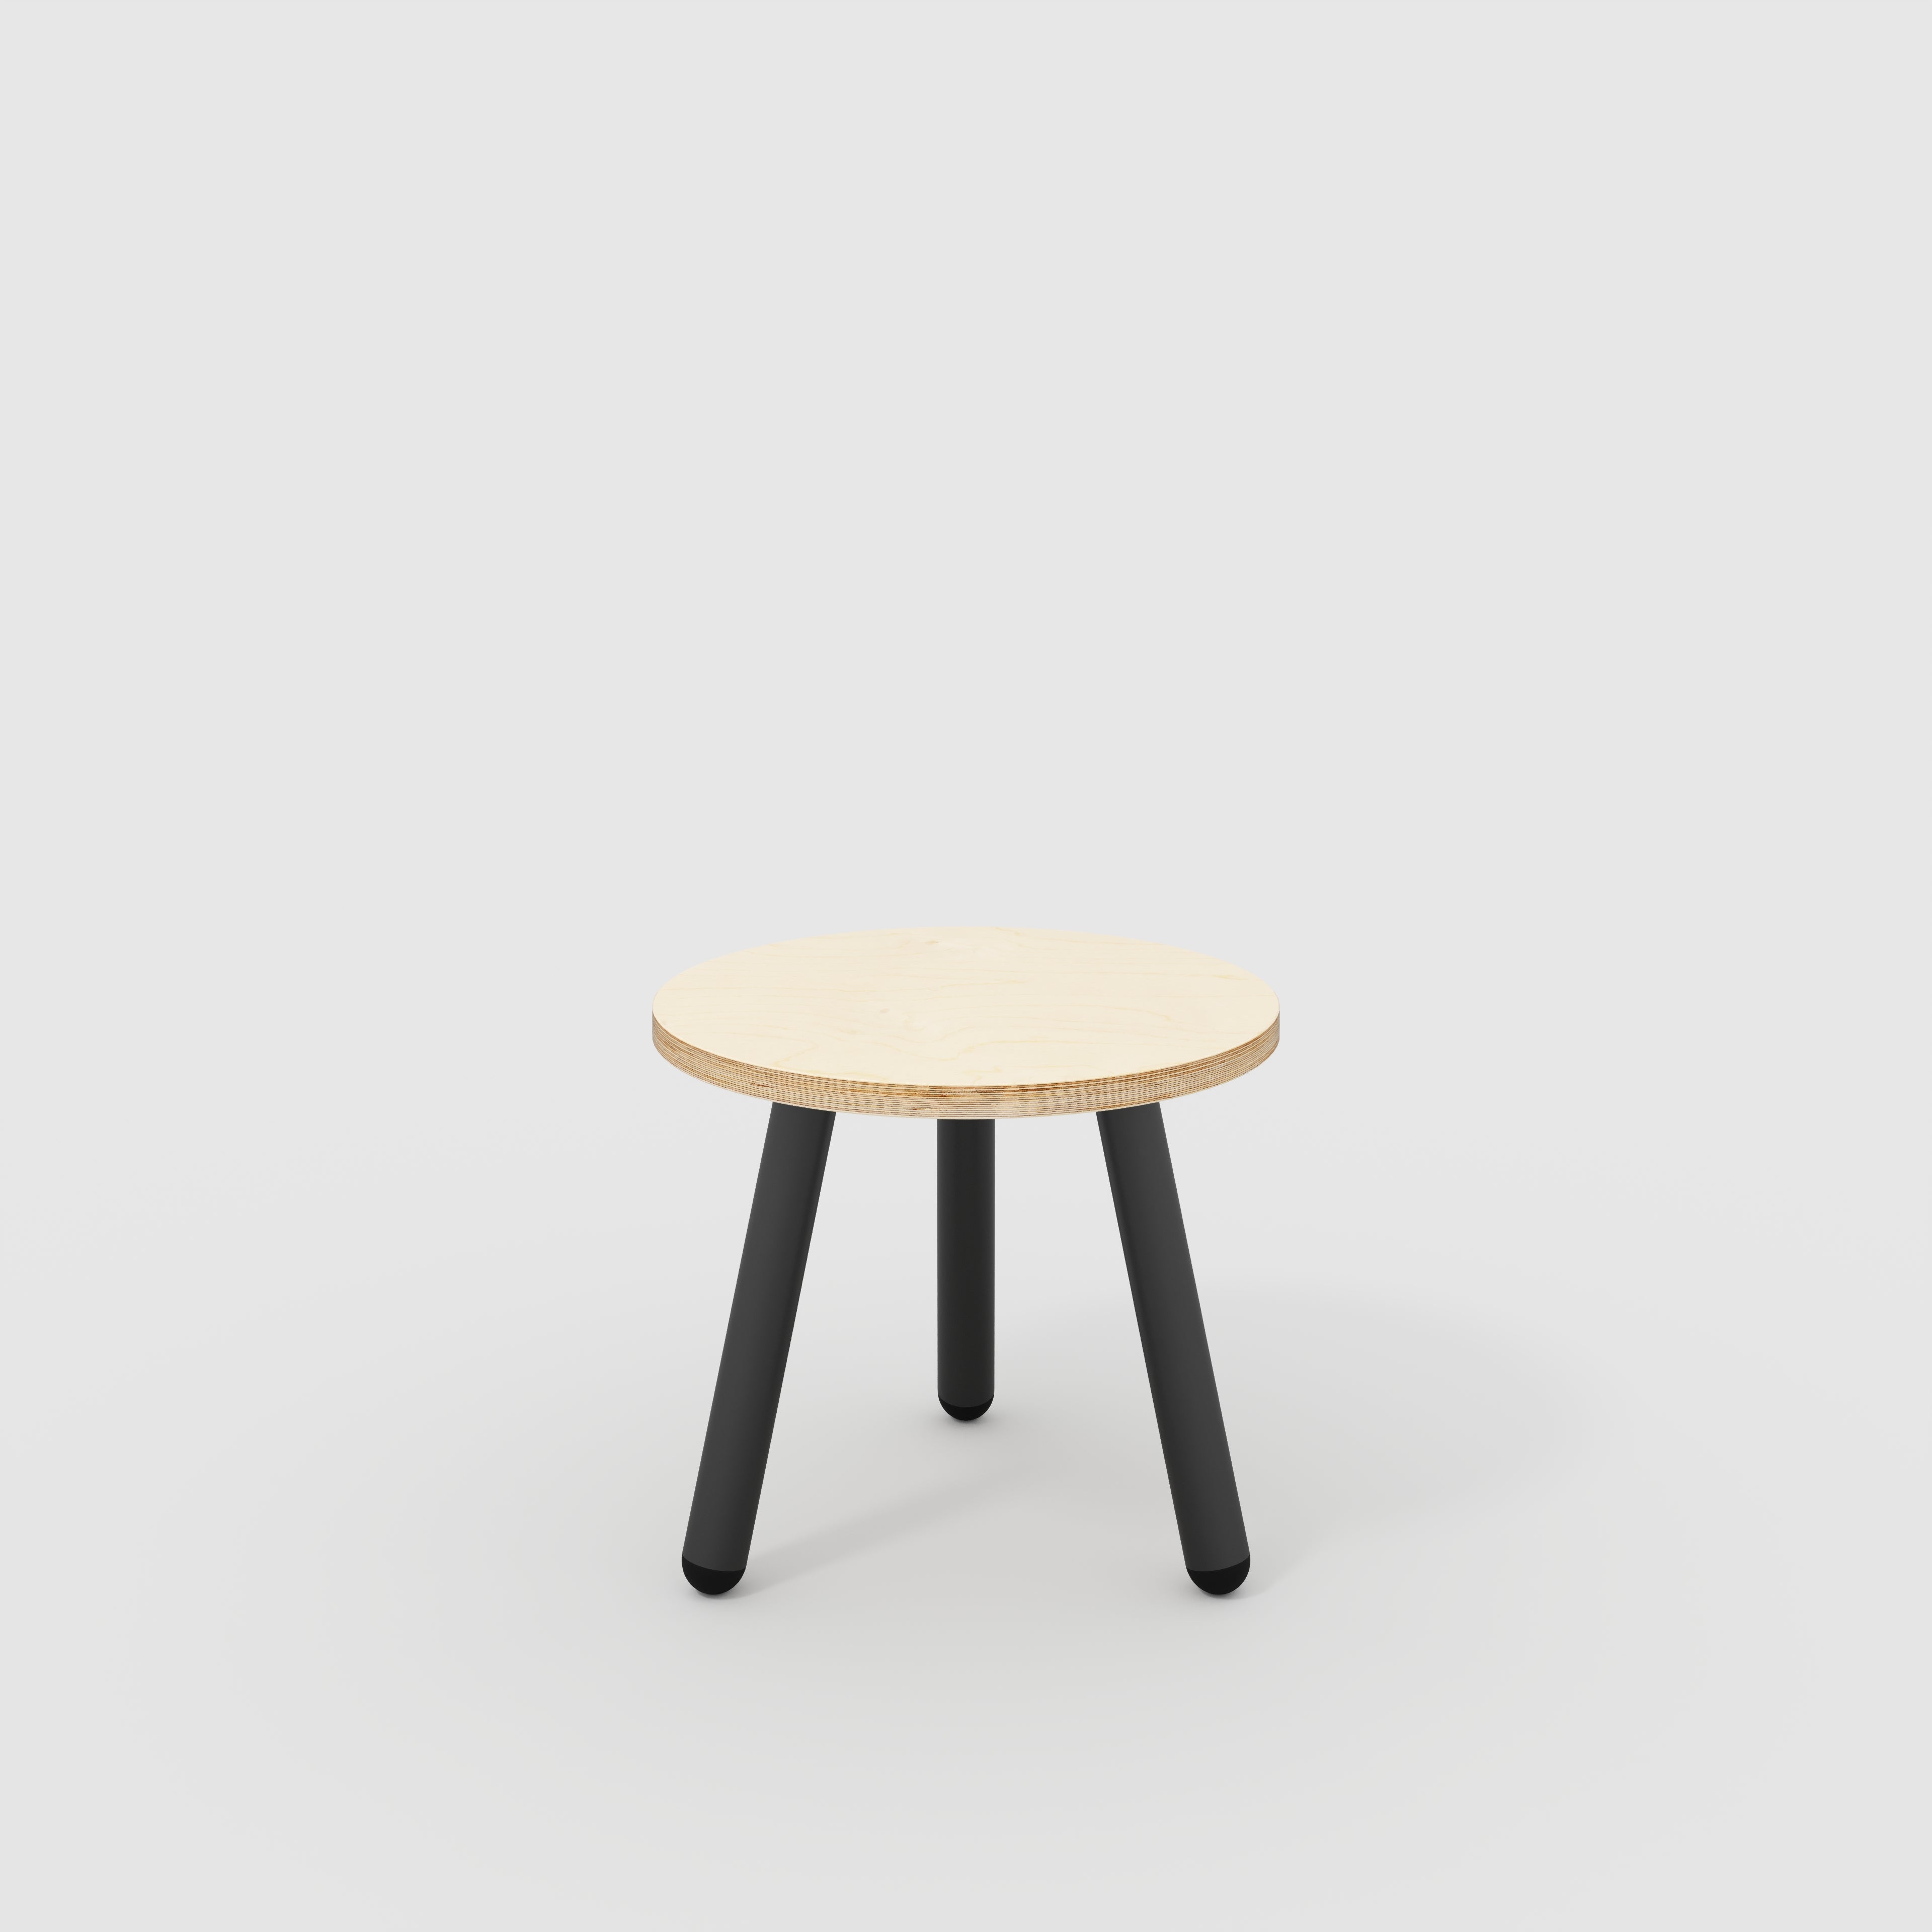 Round Side Table with Black Round Single Pin Legs - Plywood Birch - 500(w) x 500(d) x 425(h)